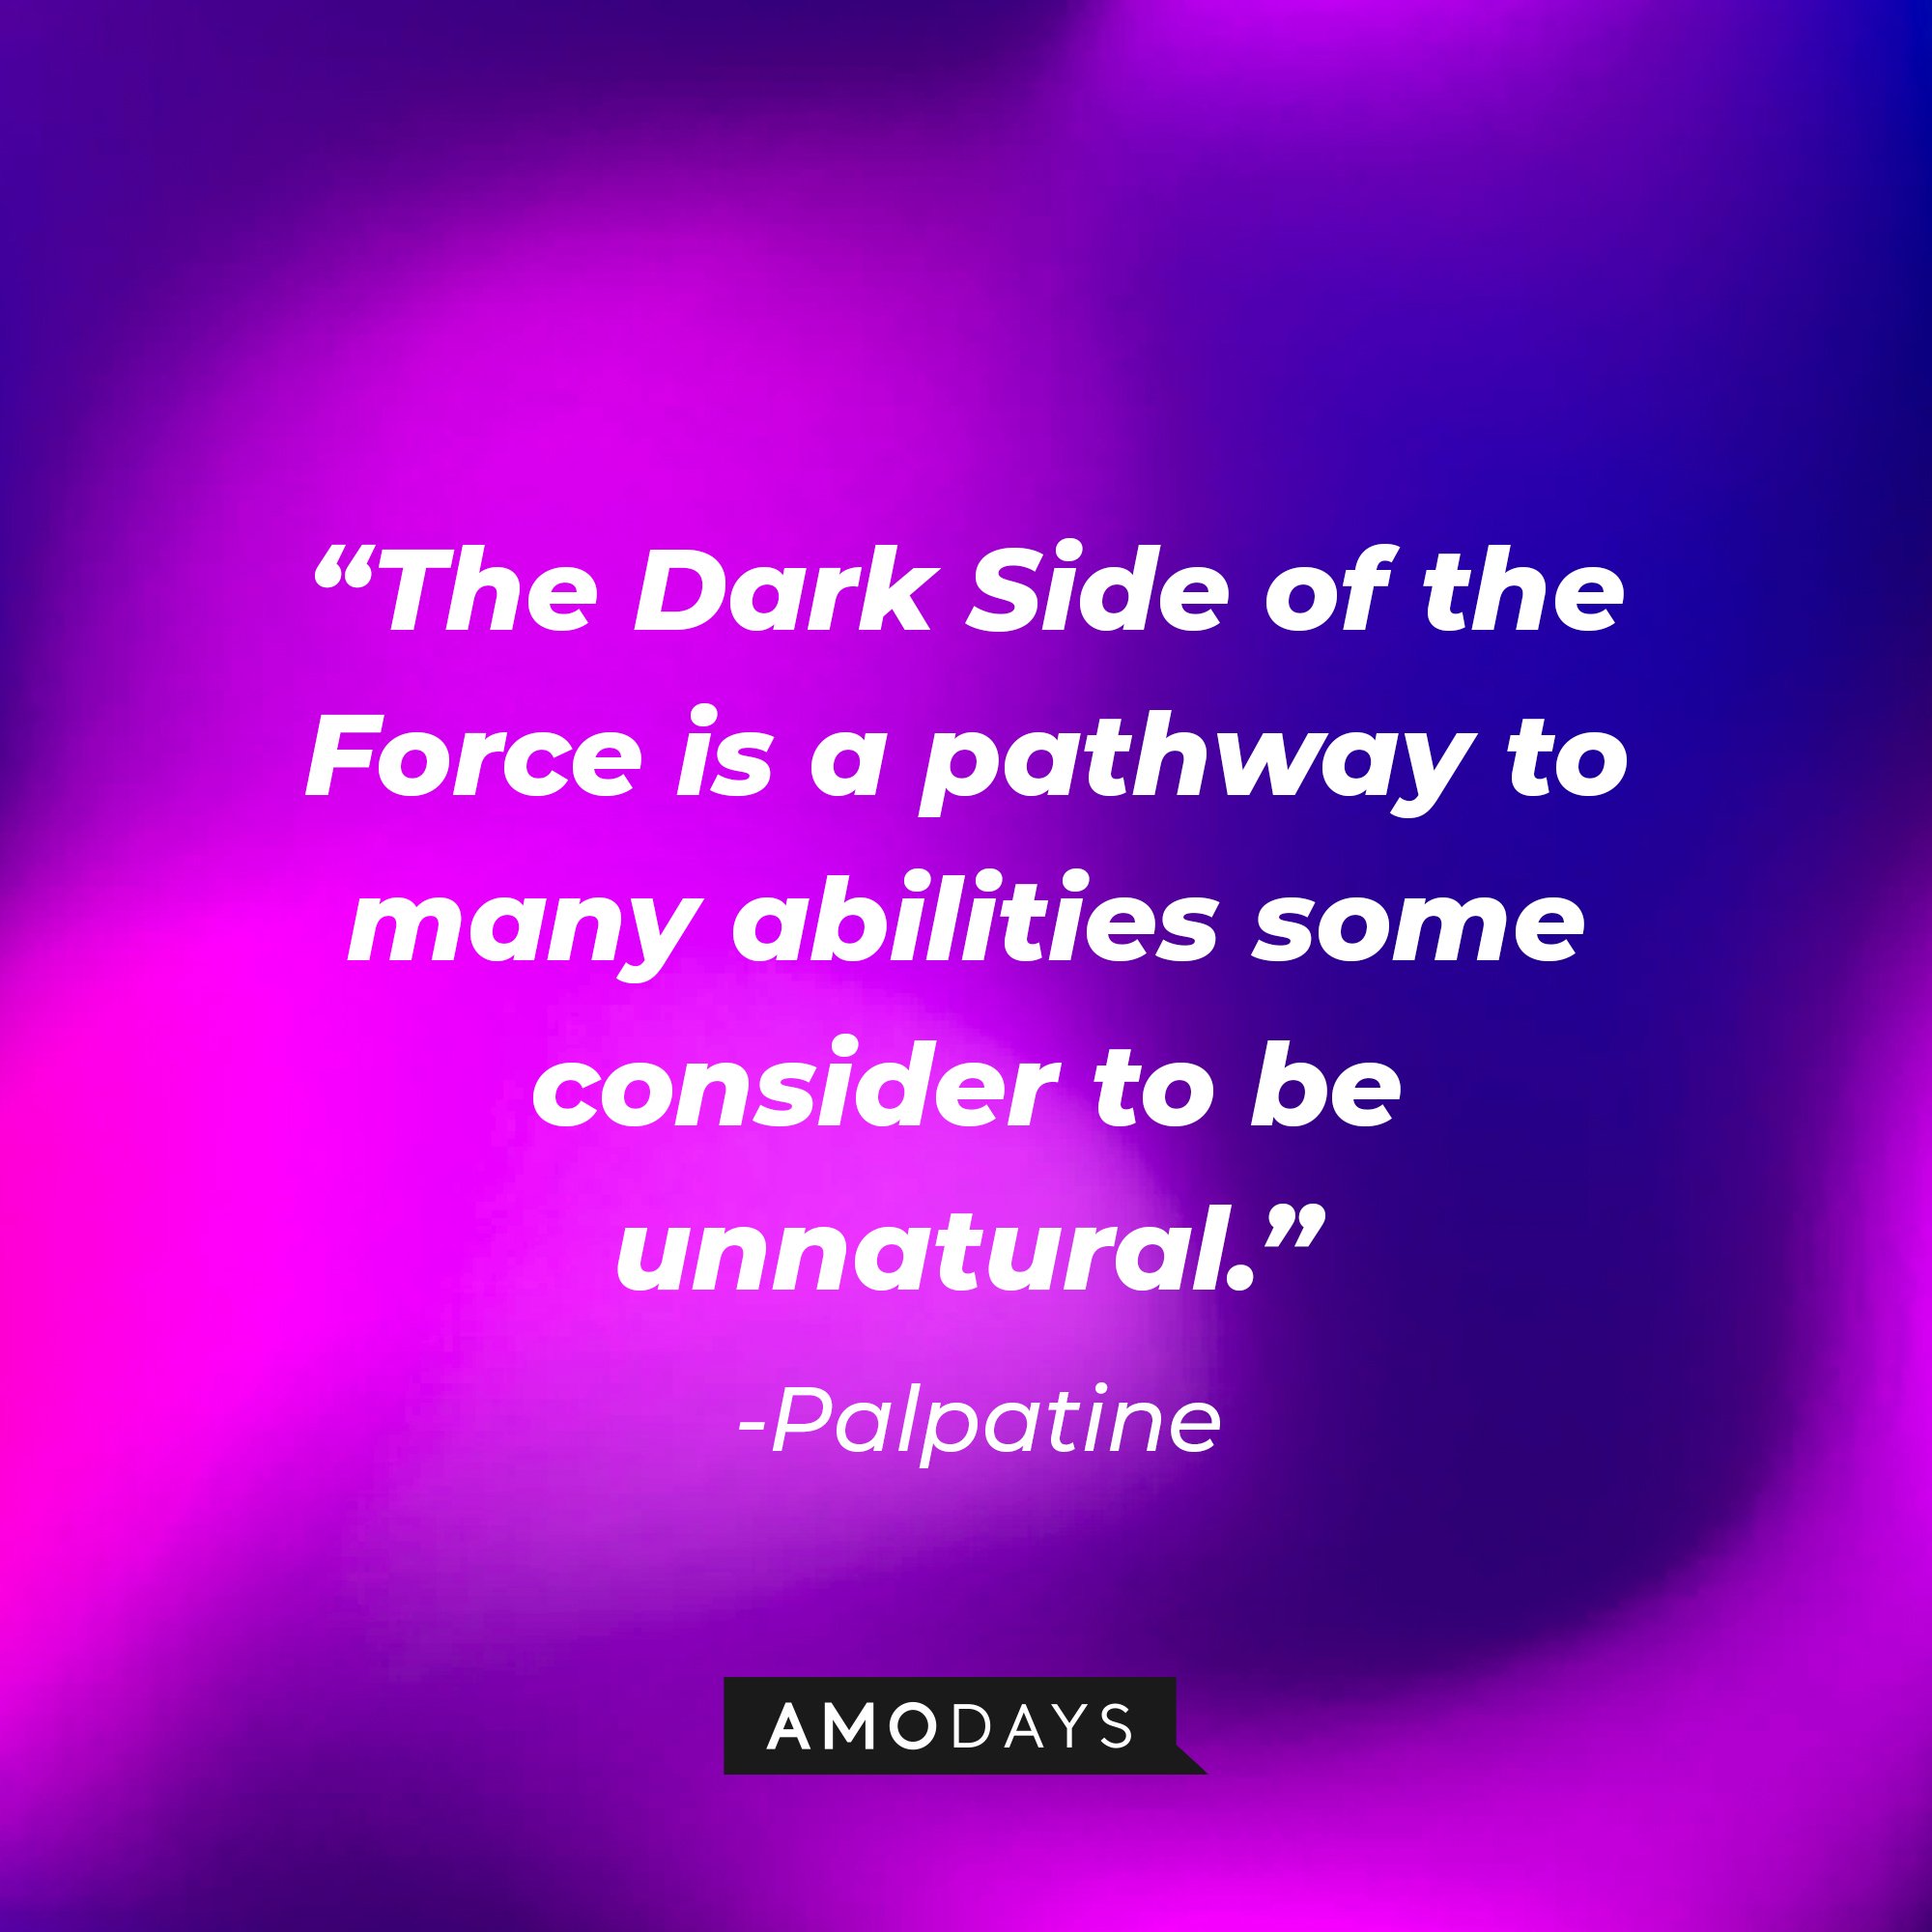 Palpatine's quote: “The Dark Side of the Force is a pathway to many abilities some consider to be unnatural. | Image: AmoDays